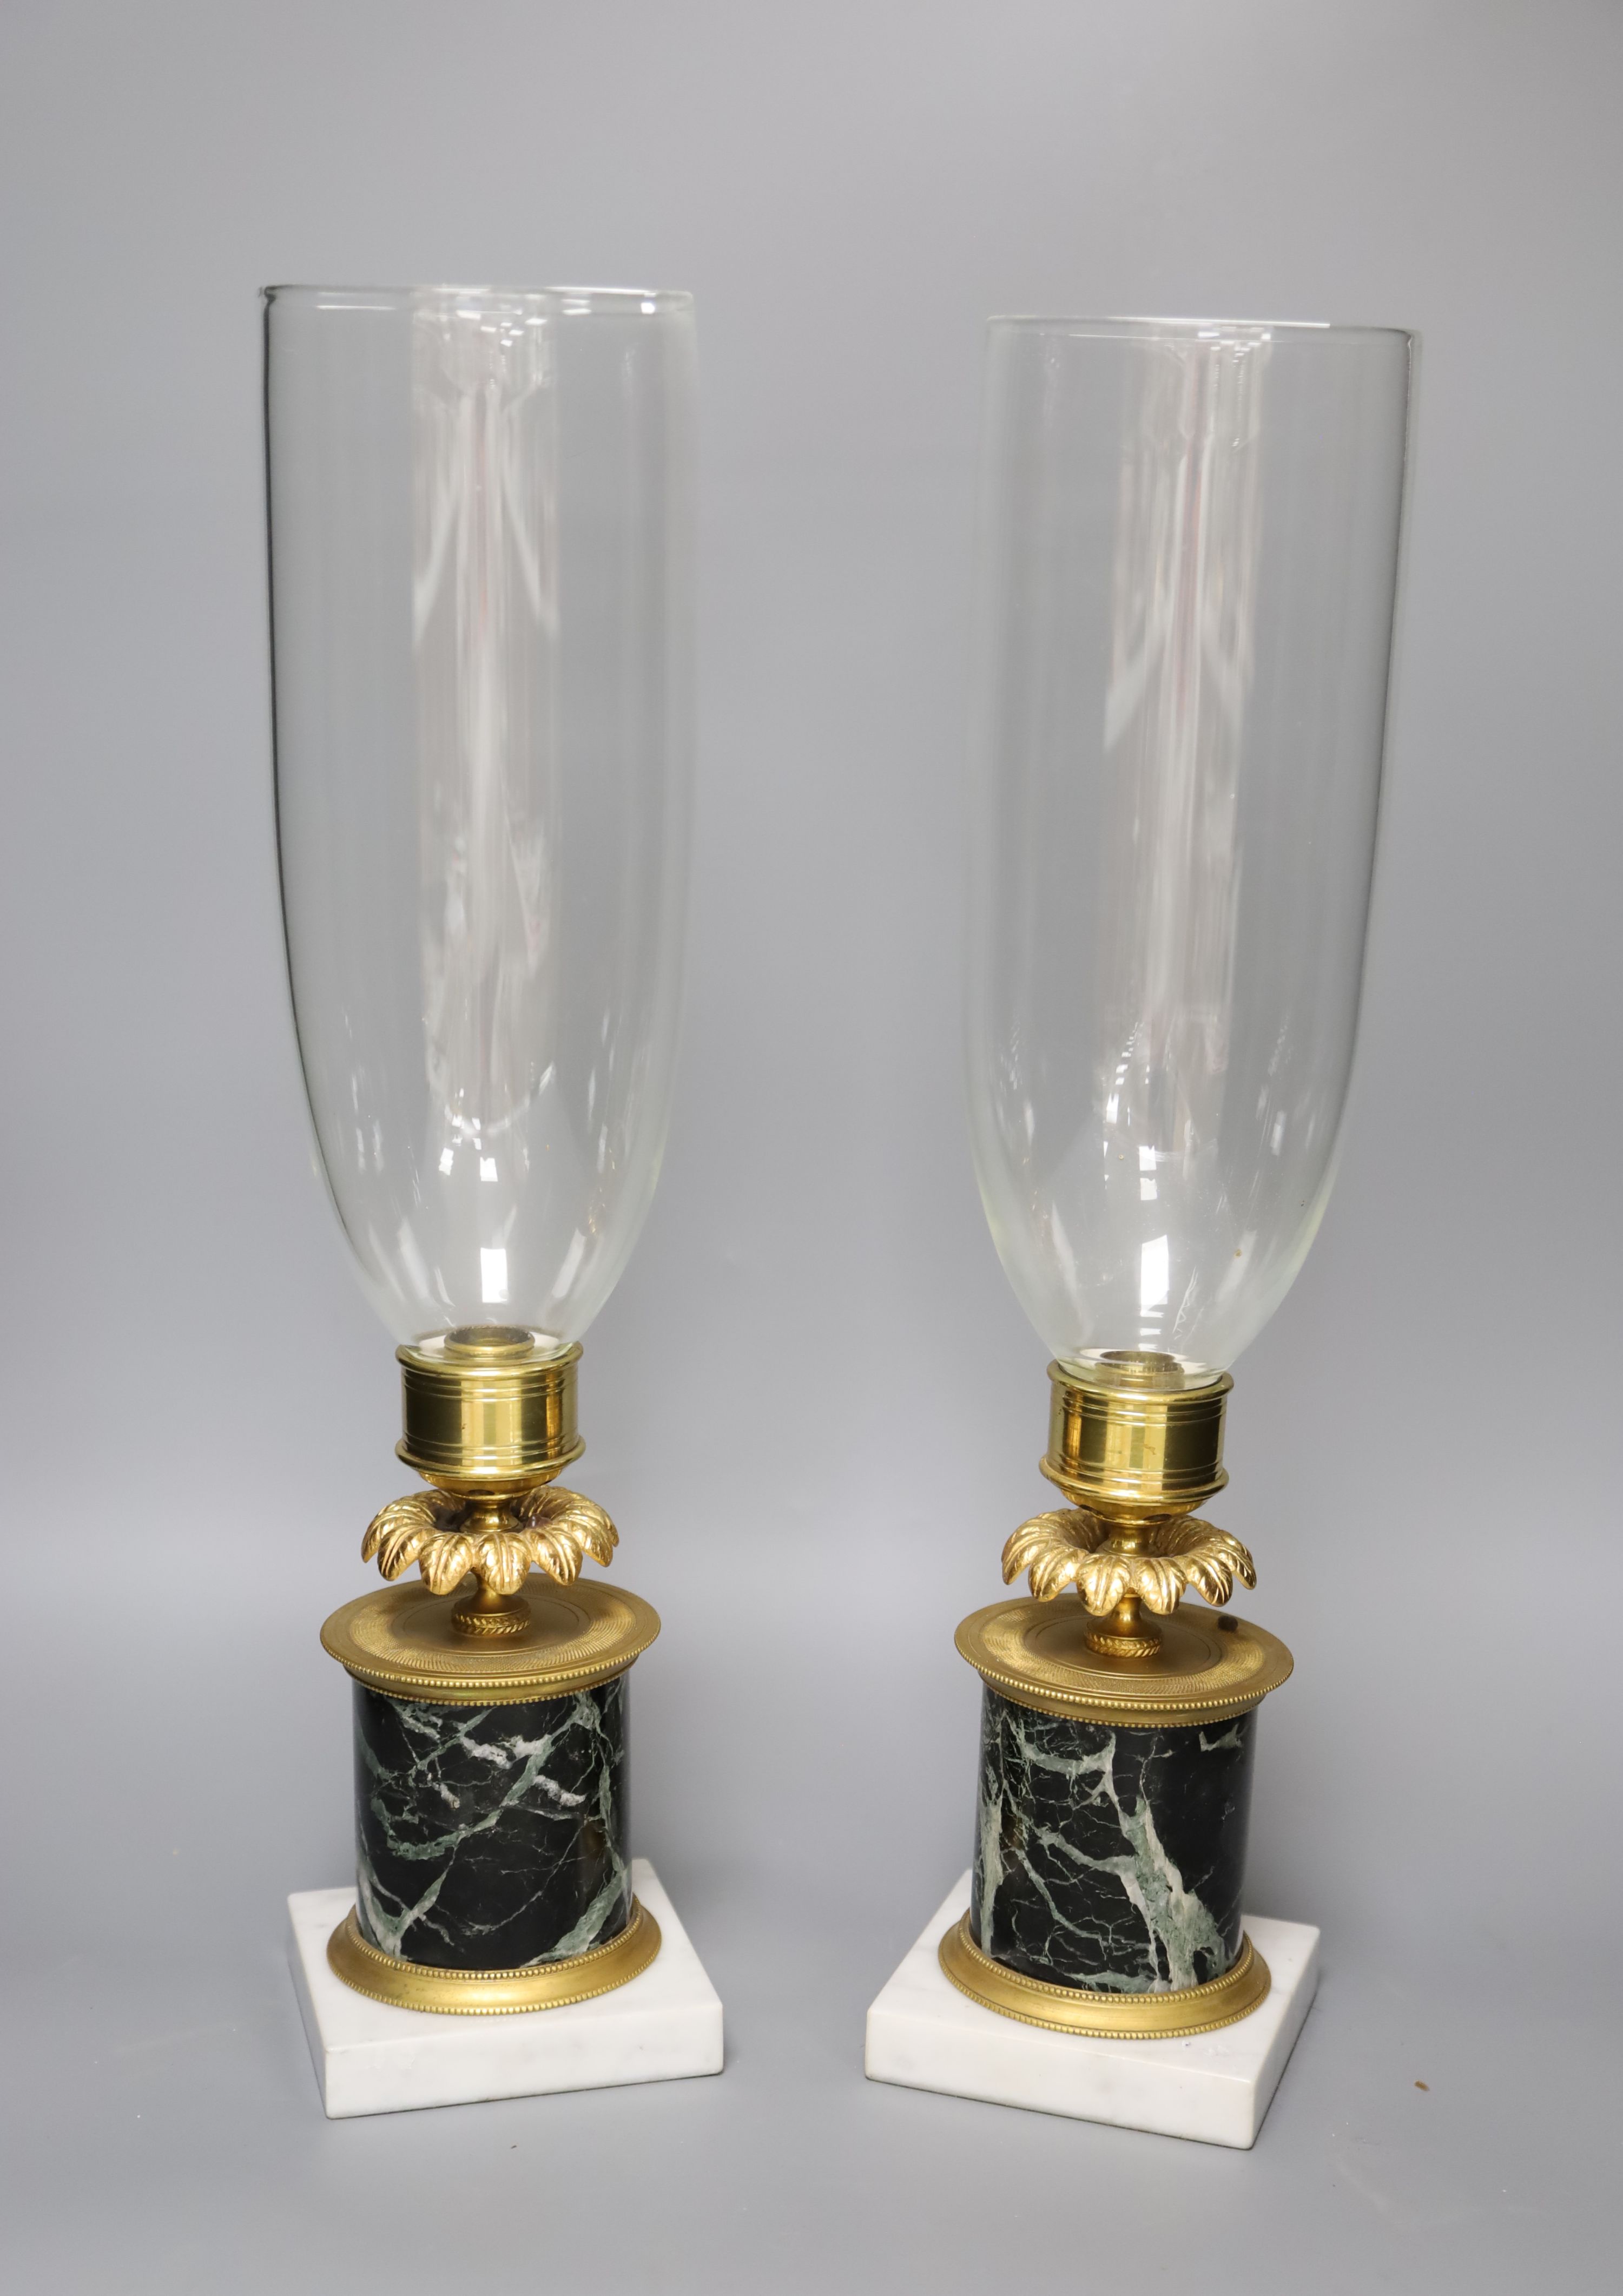 A pair of Regency style ormolu and marble candle lamps, height 48cm to glass storm shades